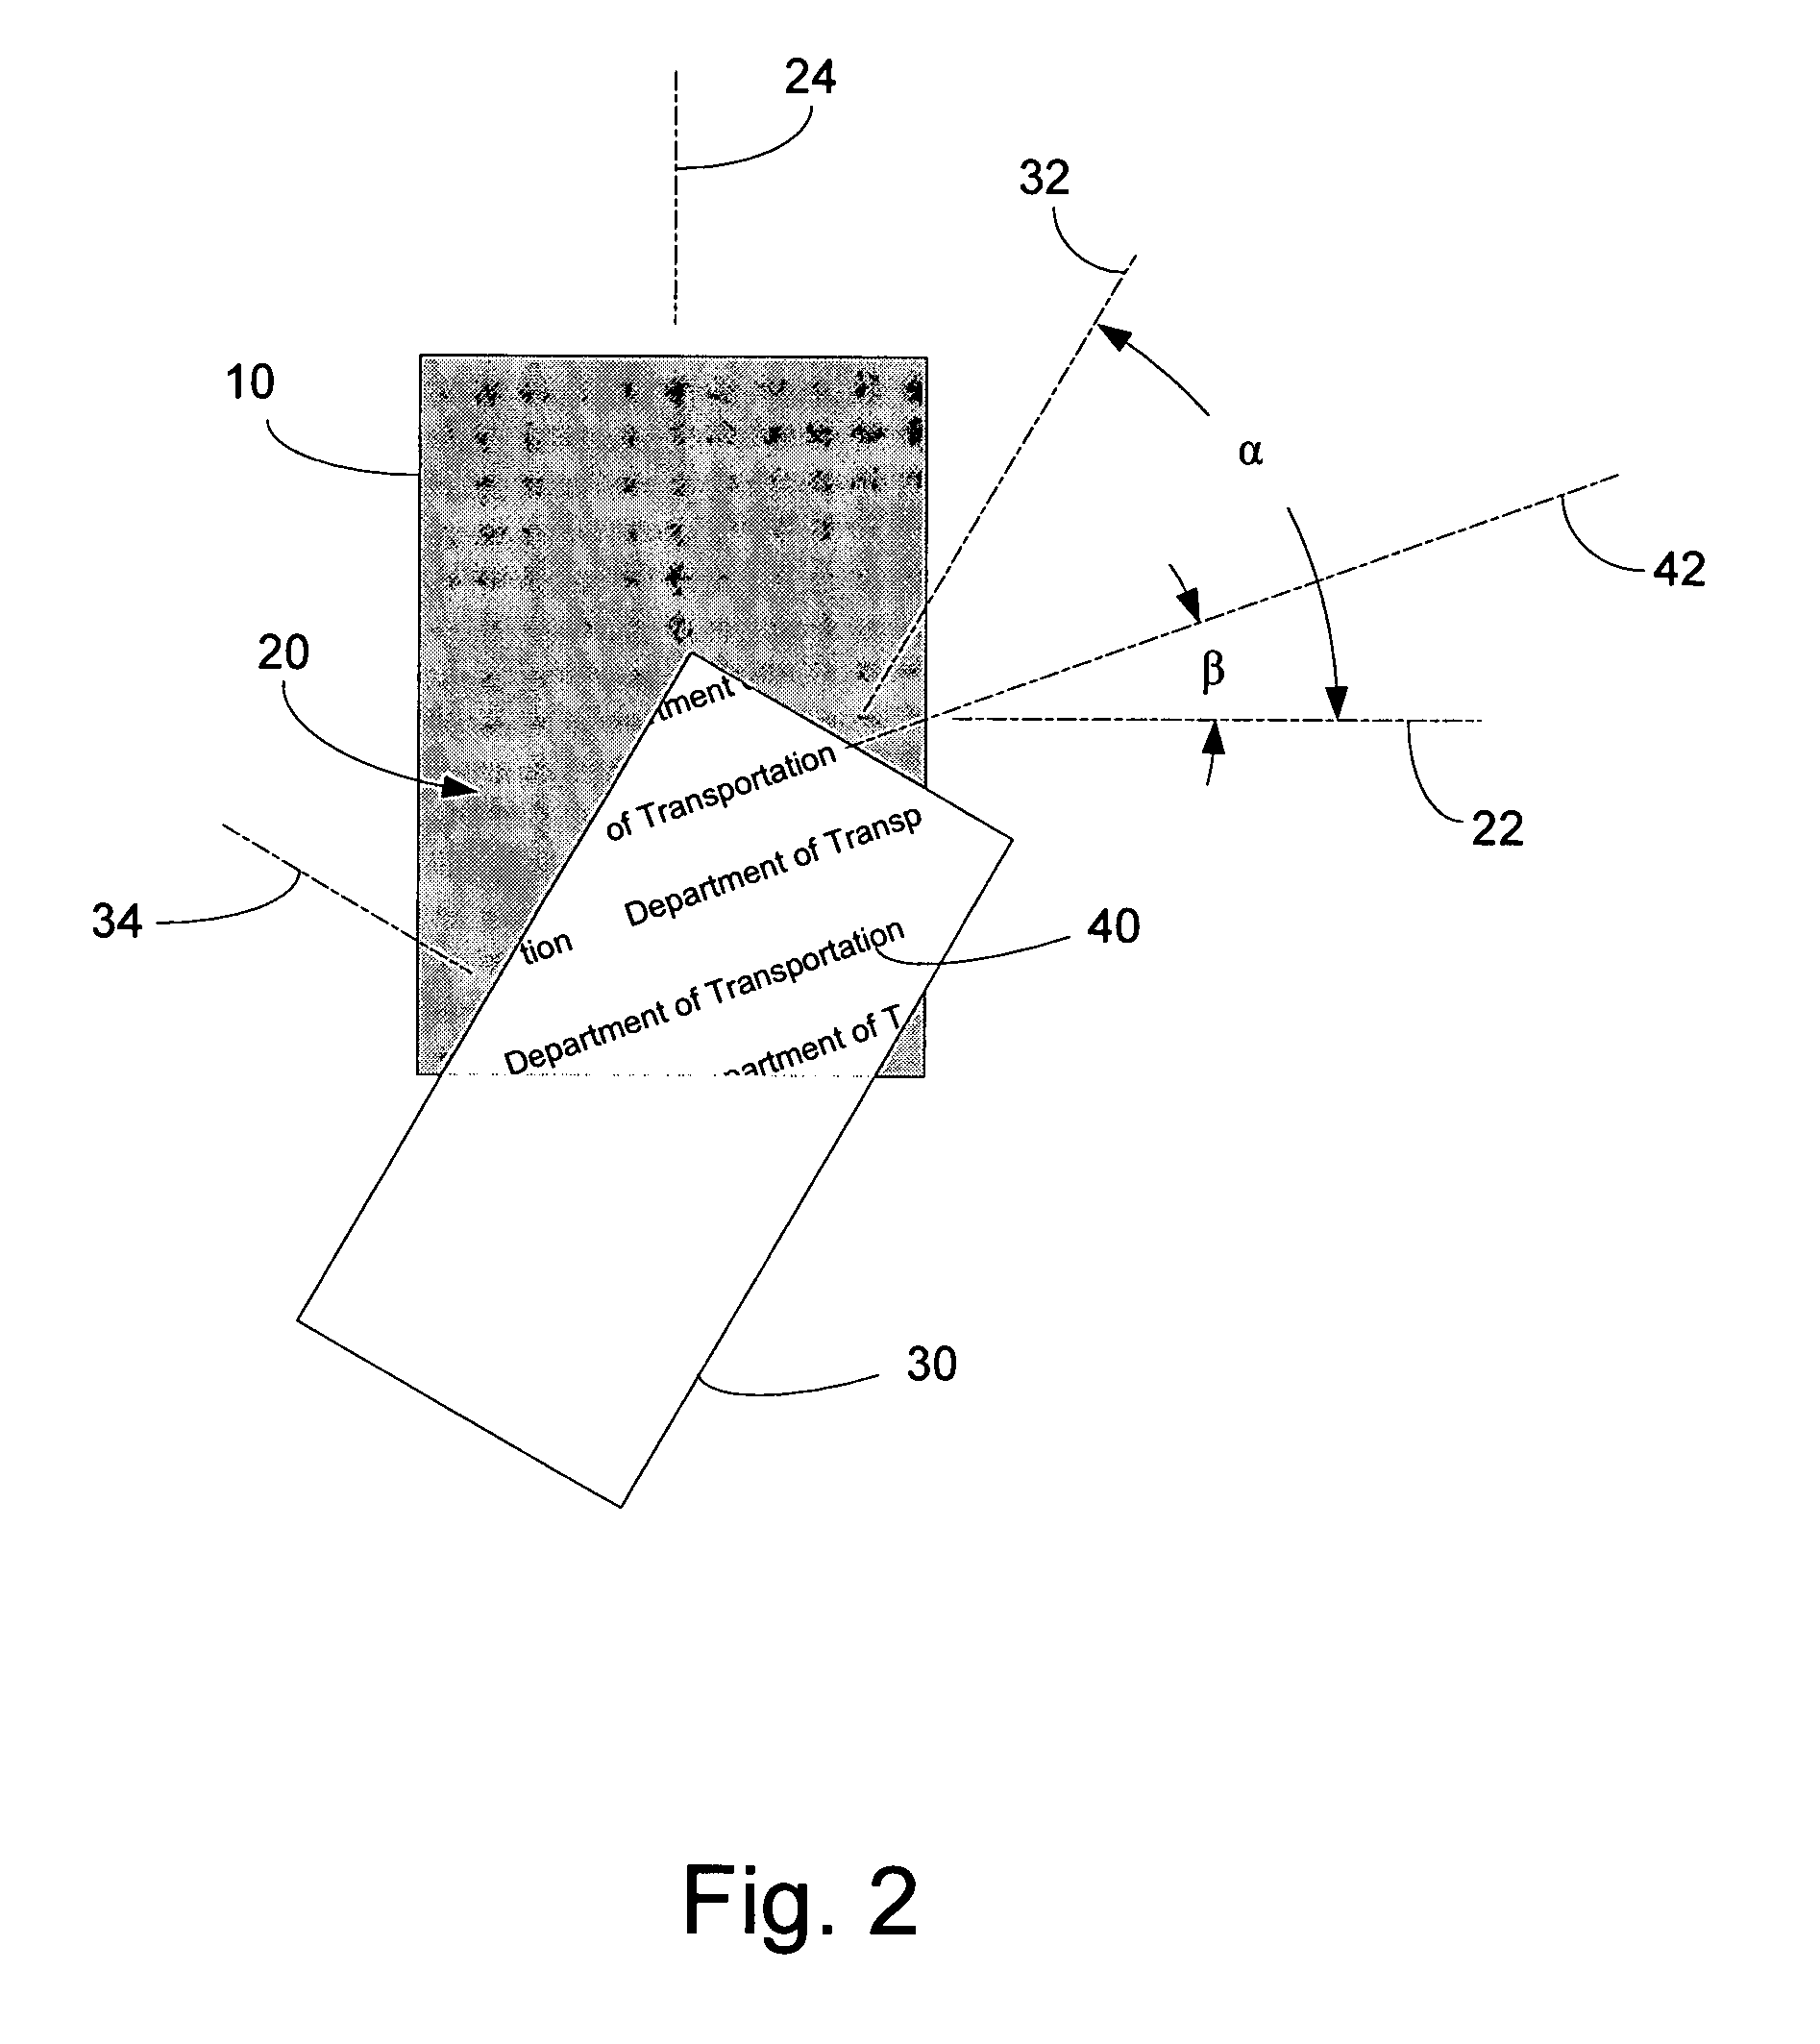 Method and system for encoding images using encoding parameters from multiple sources